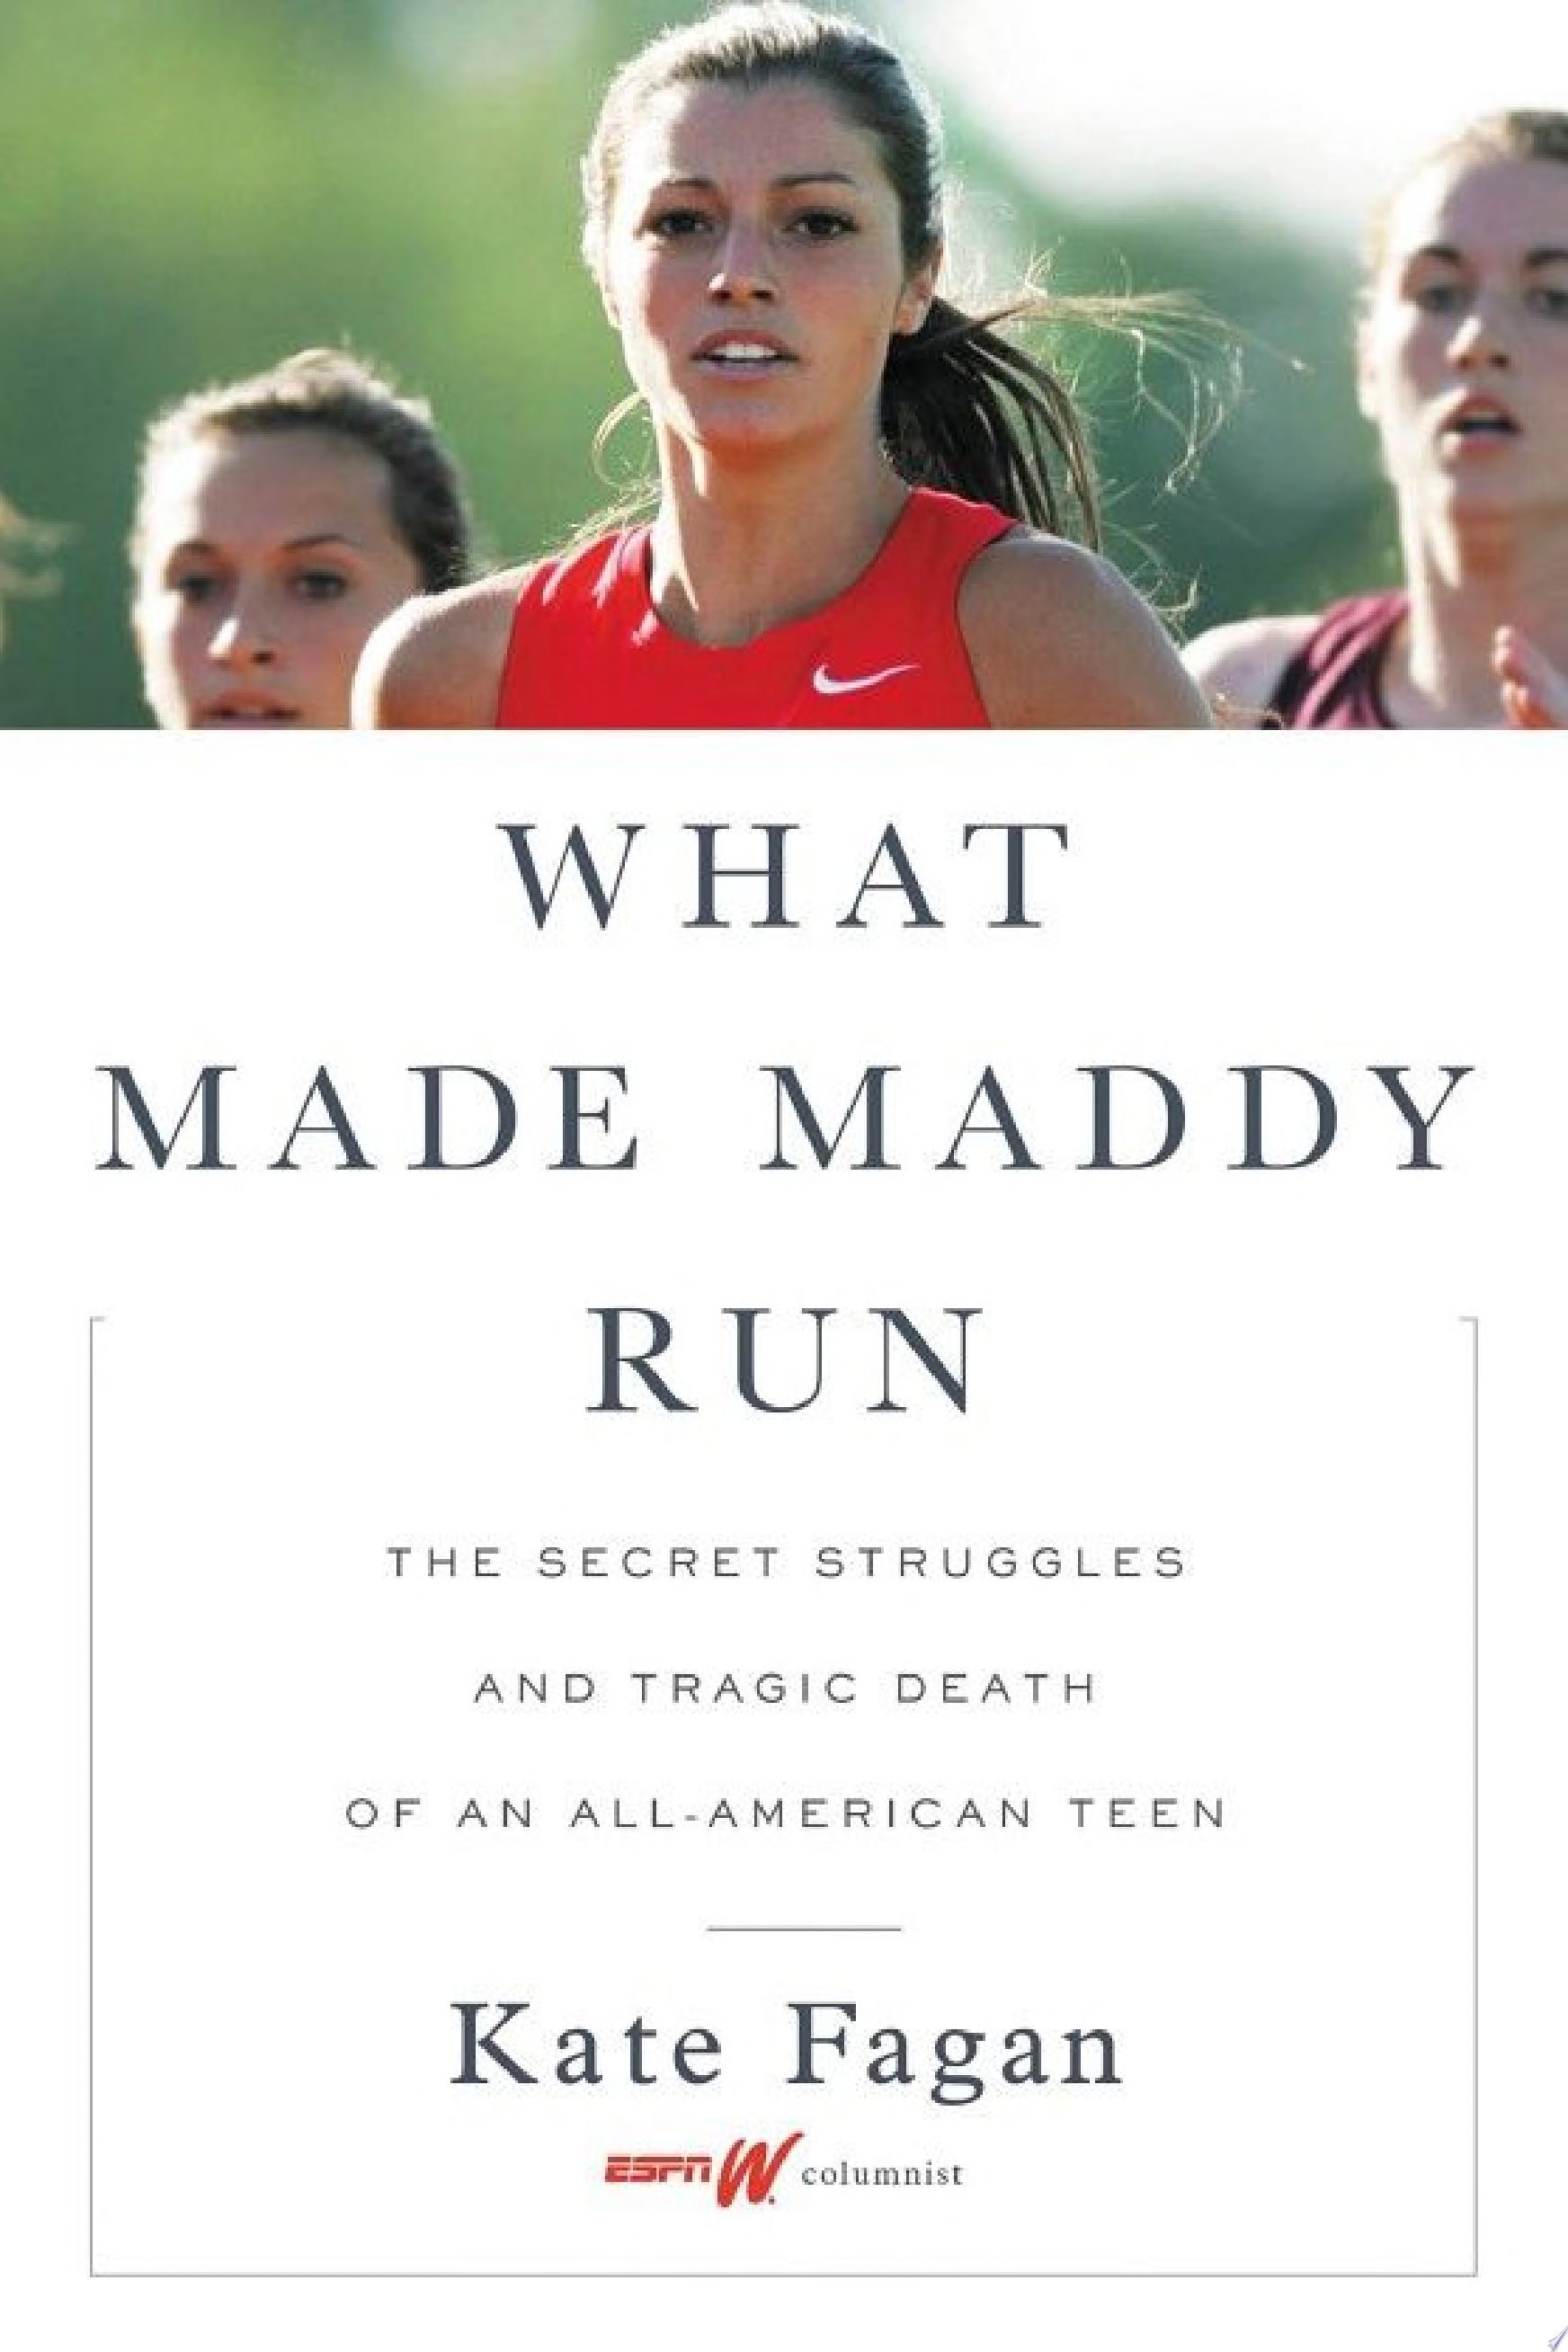 Image for "What Made Maddy Run"